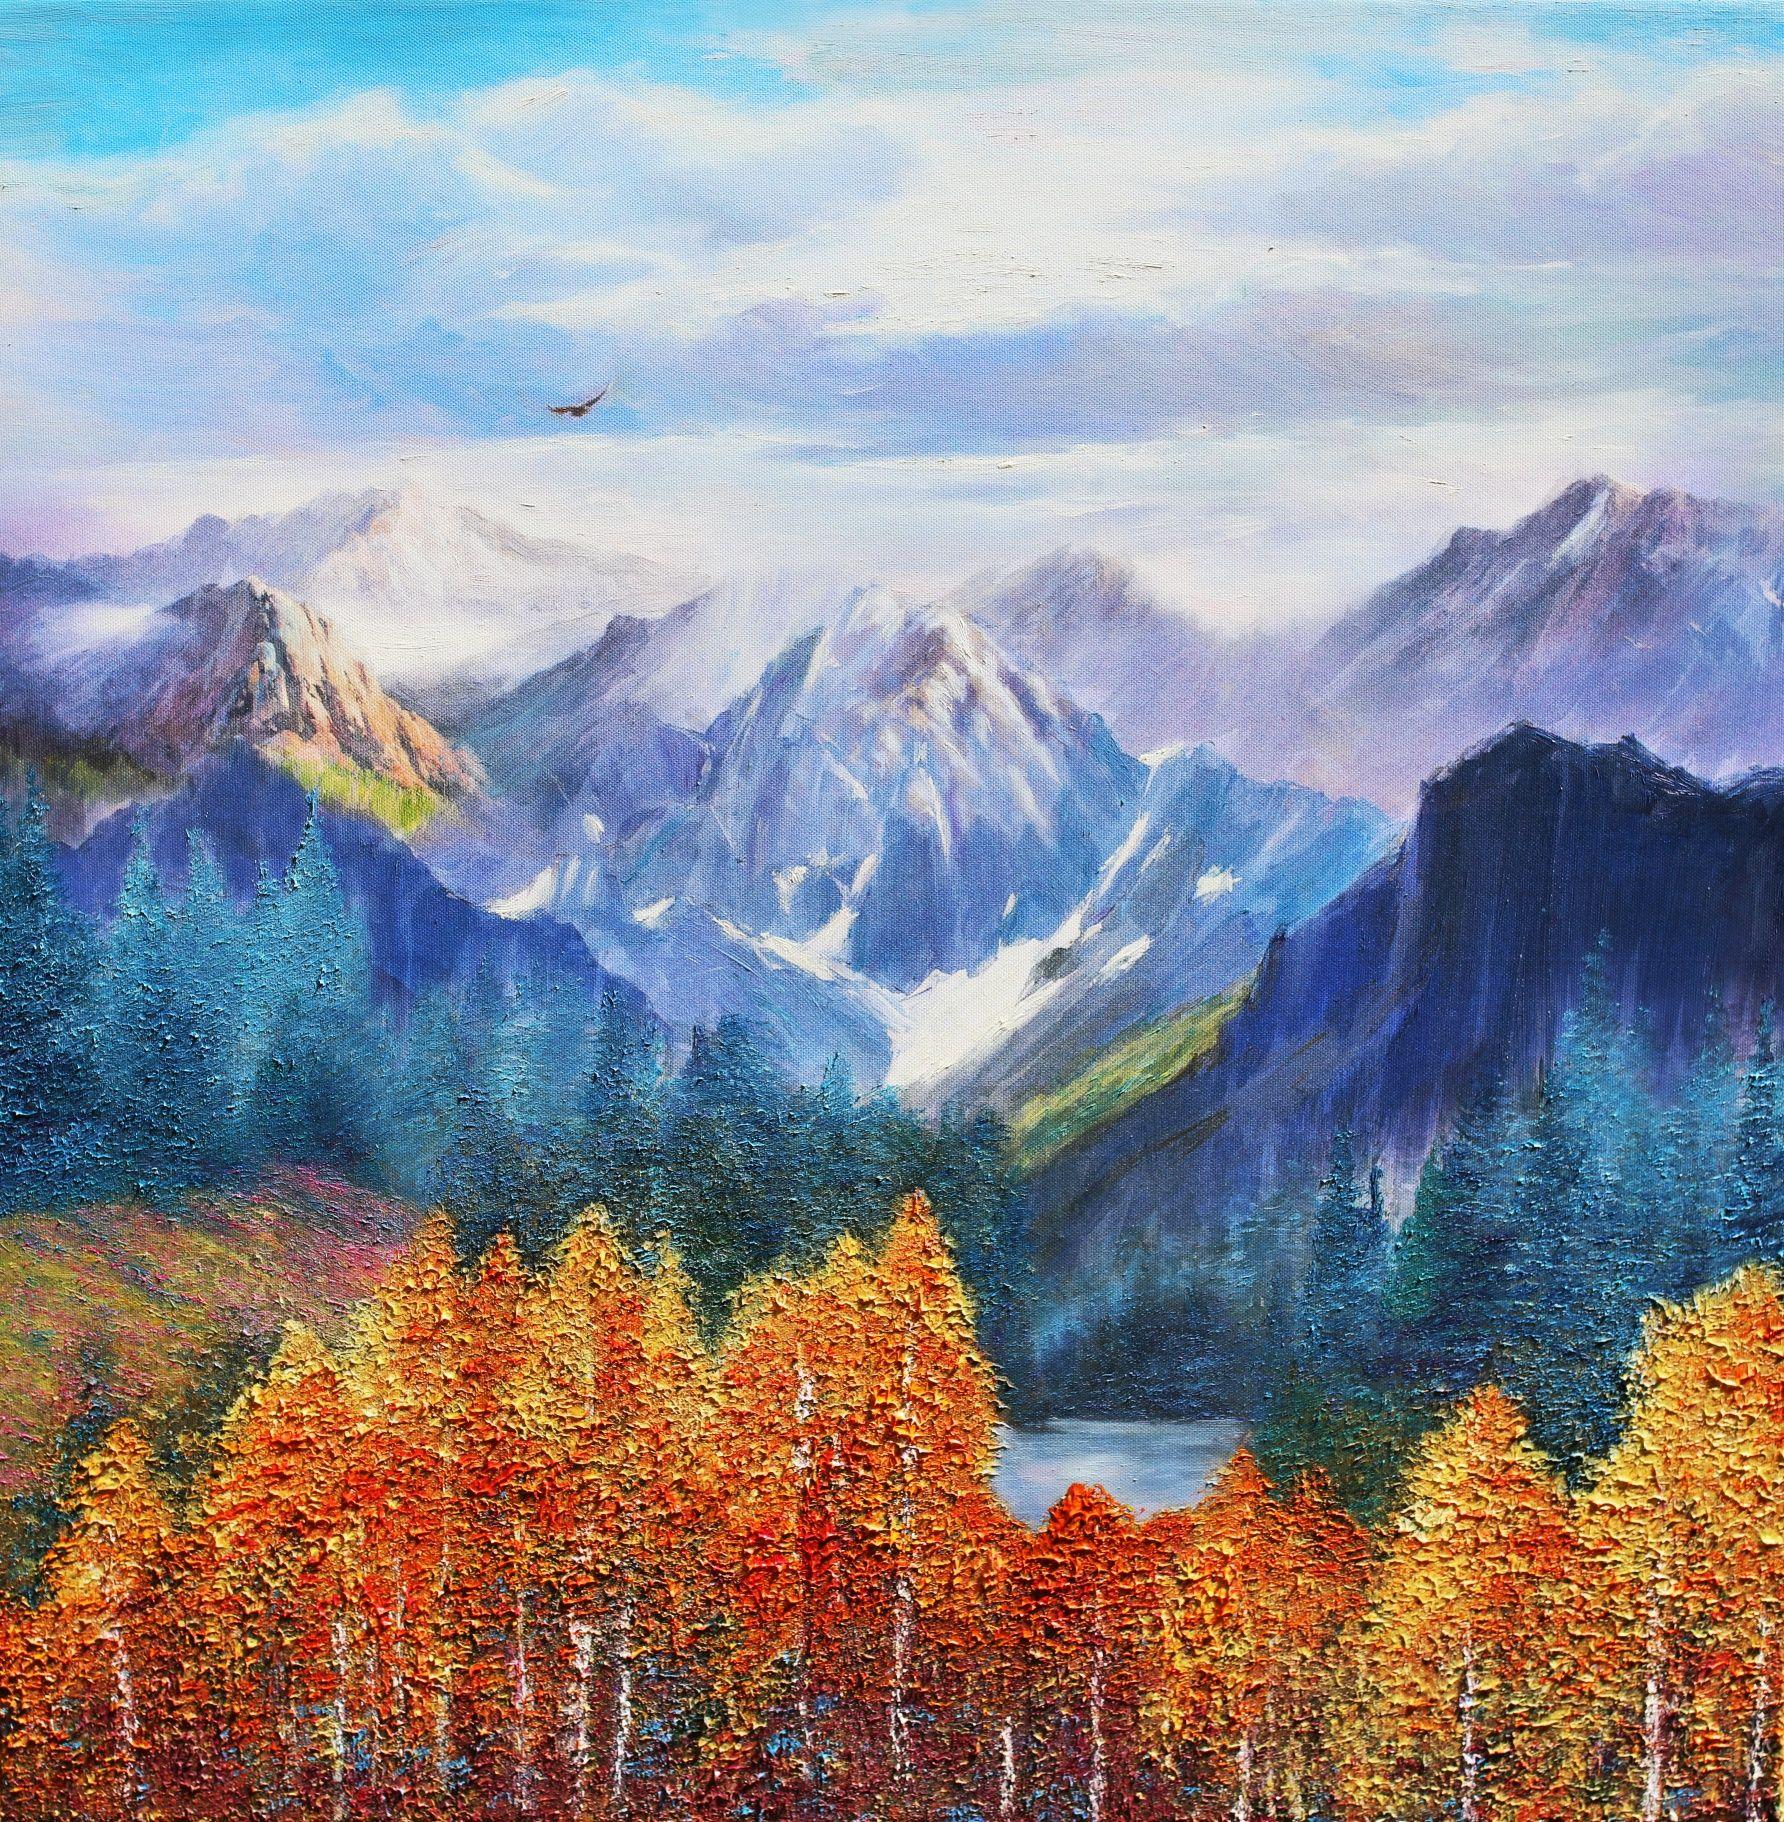 â€œIn this painting, the great dominance of The Mountain Range is presented with its essence of dominion over the spectacular landscape. The feeling is wonderâ€.   The painting is executed in Clear Impressionism style in thick oils with bright